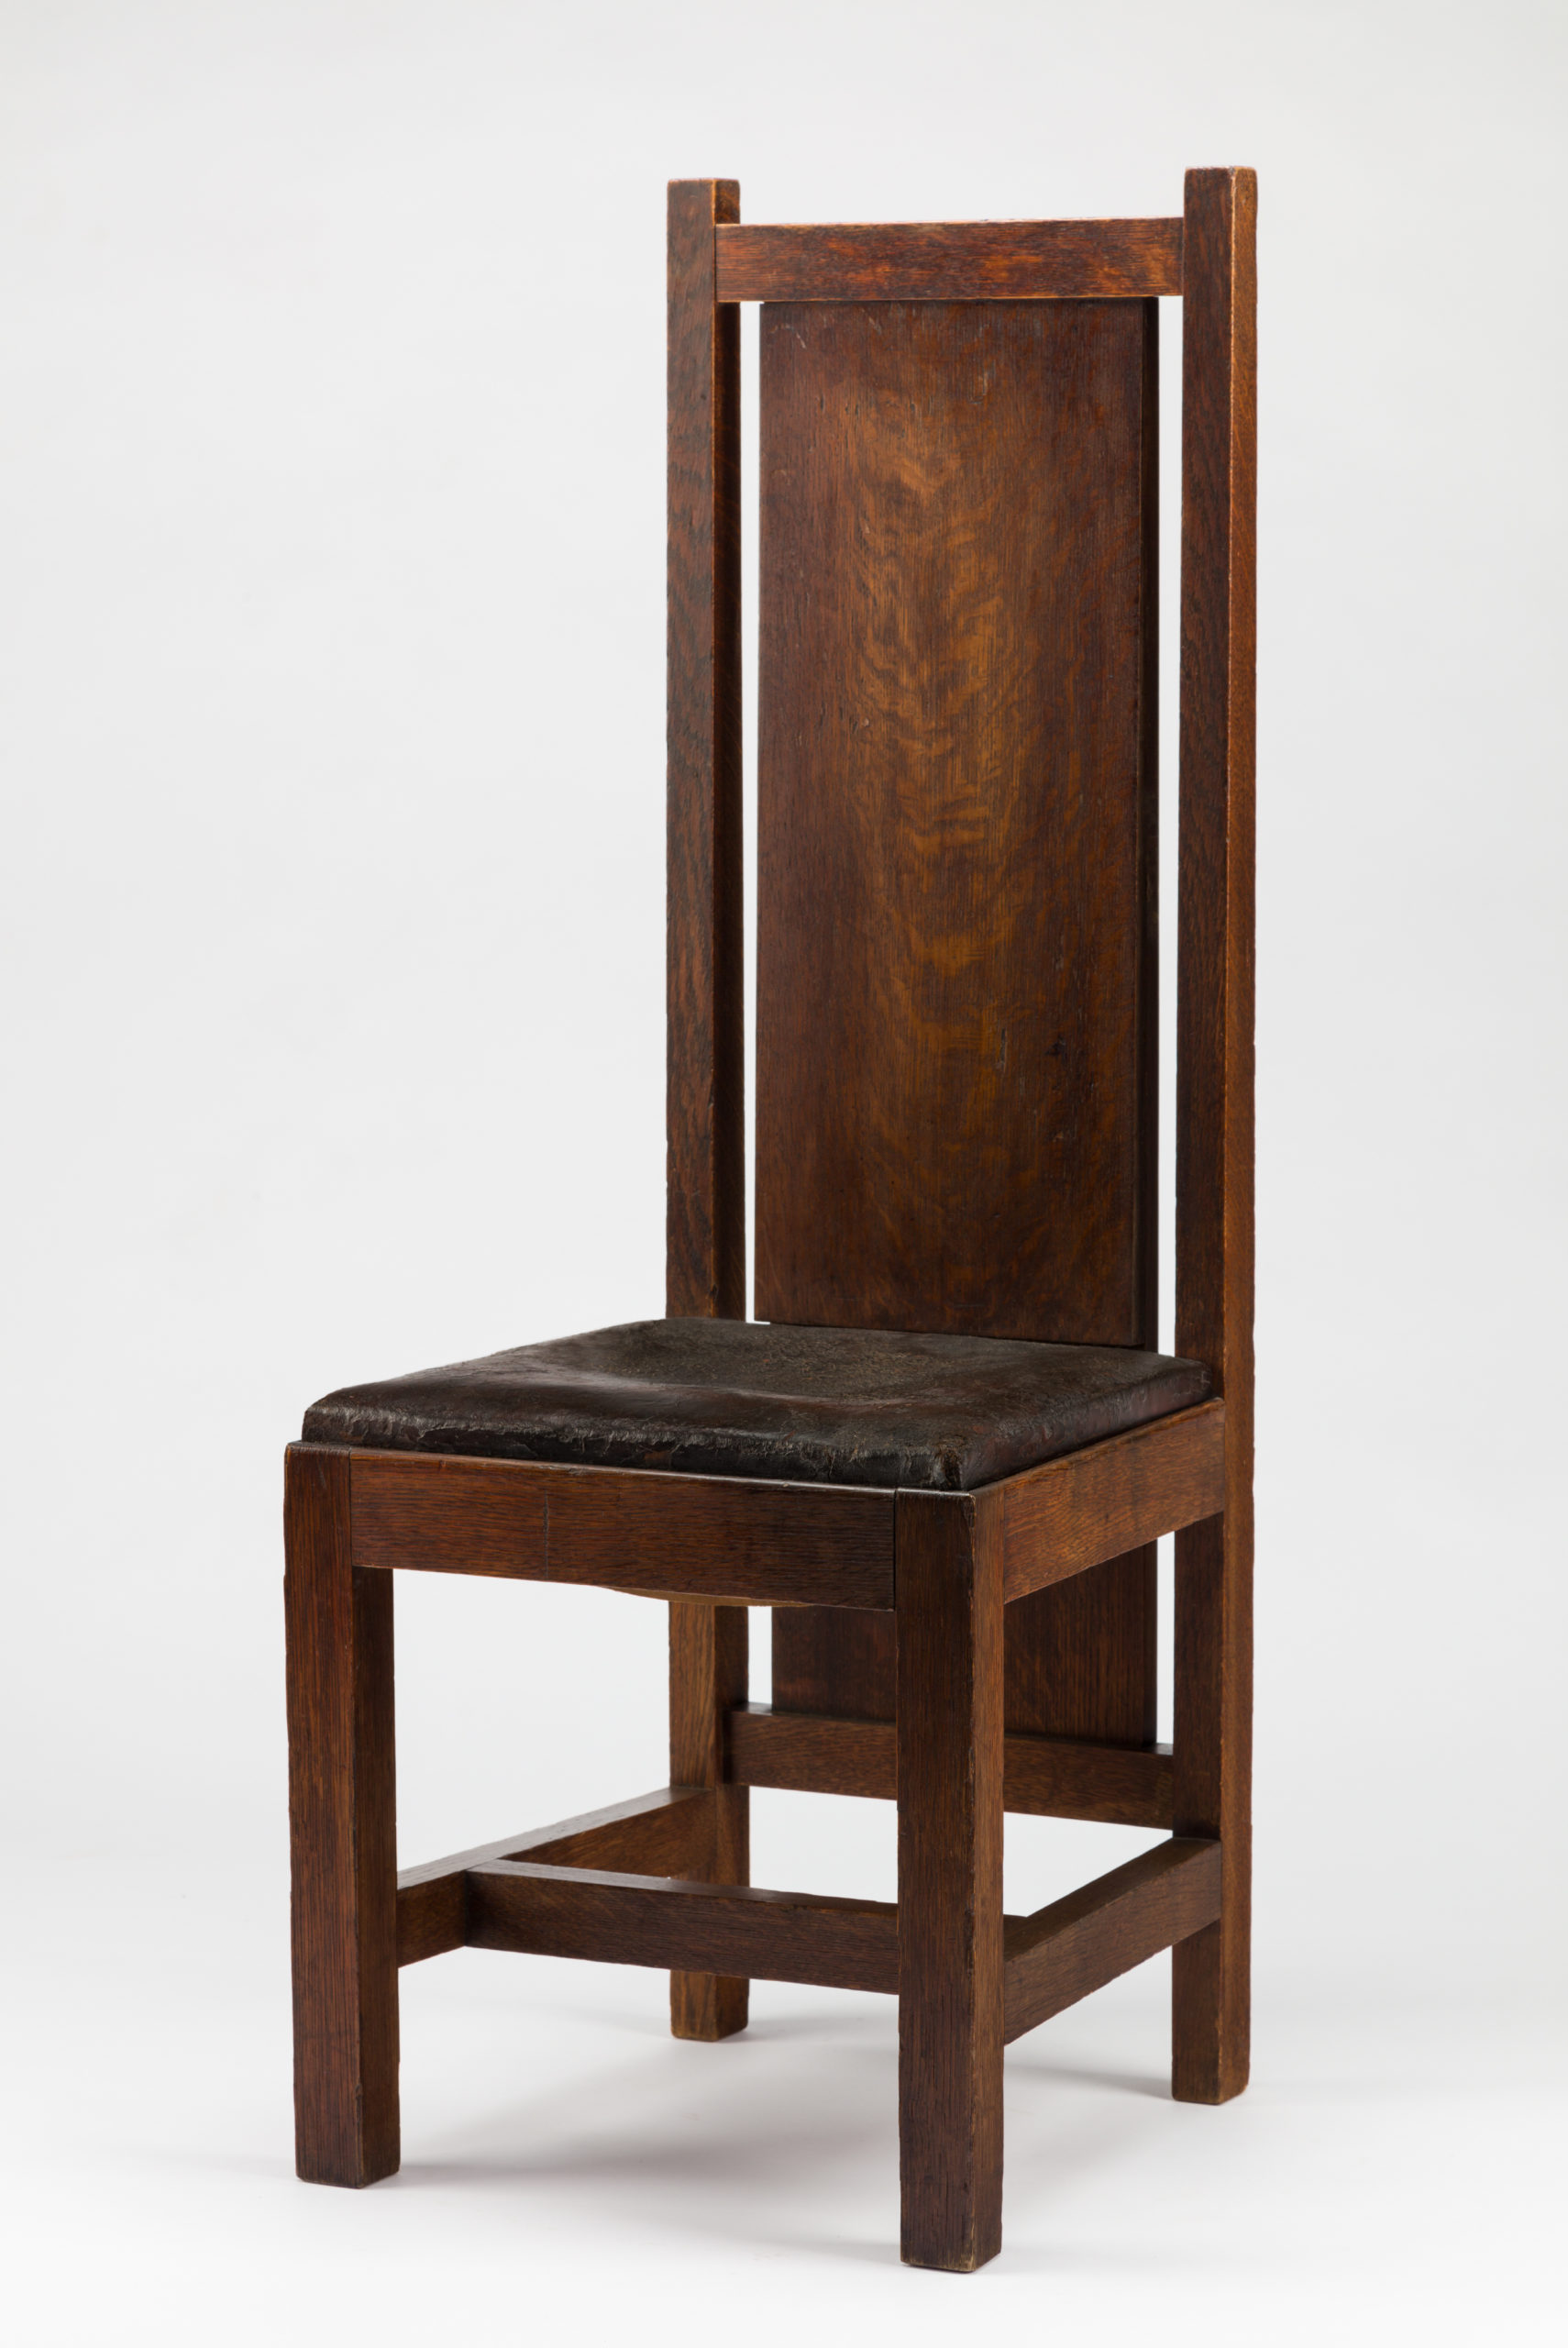 Chair from the William R. Heath House